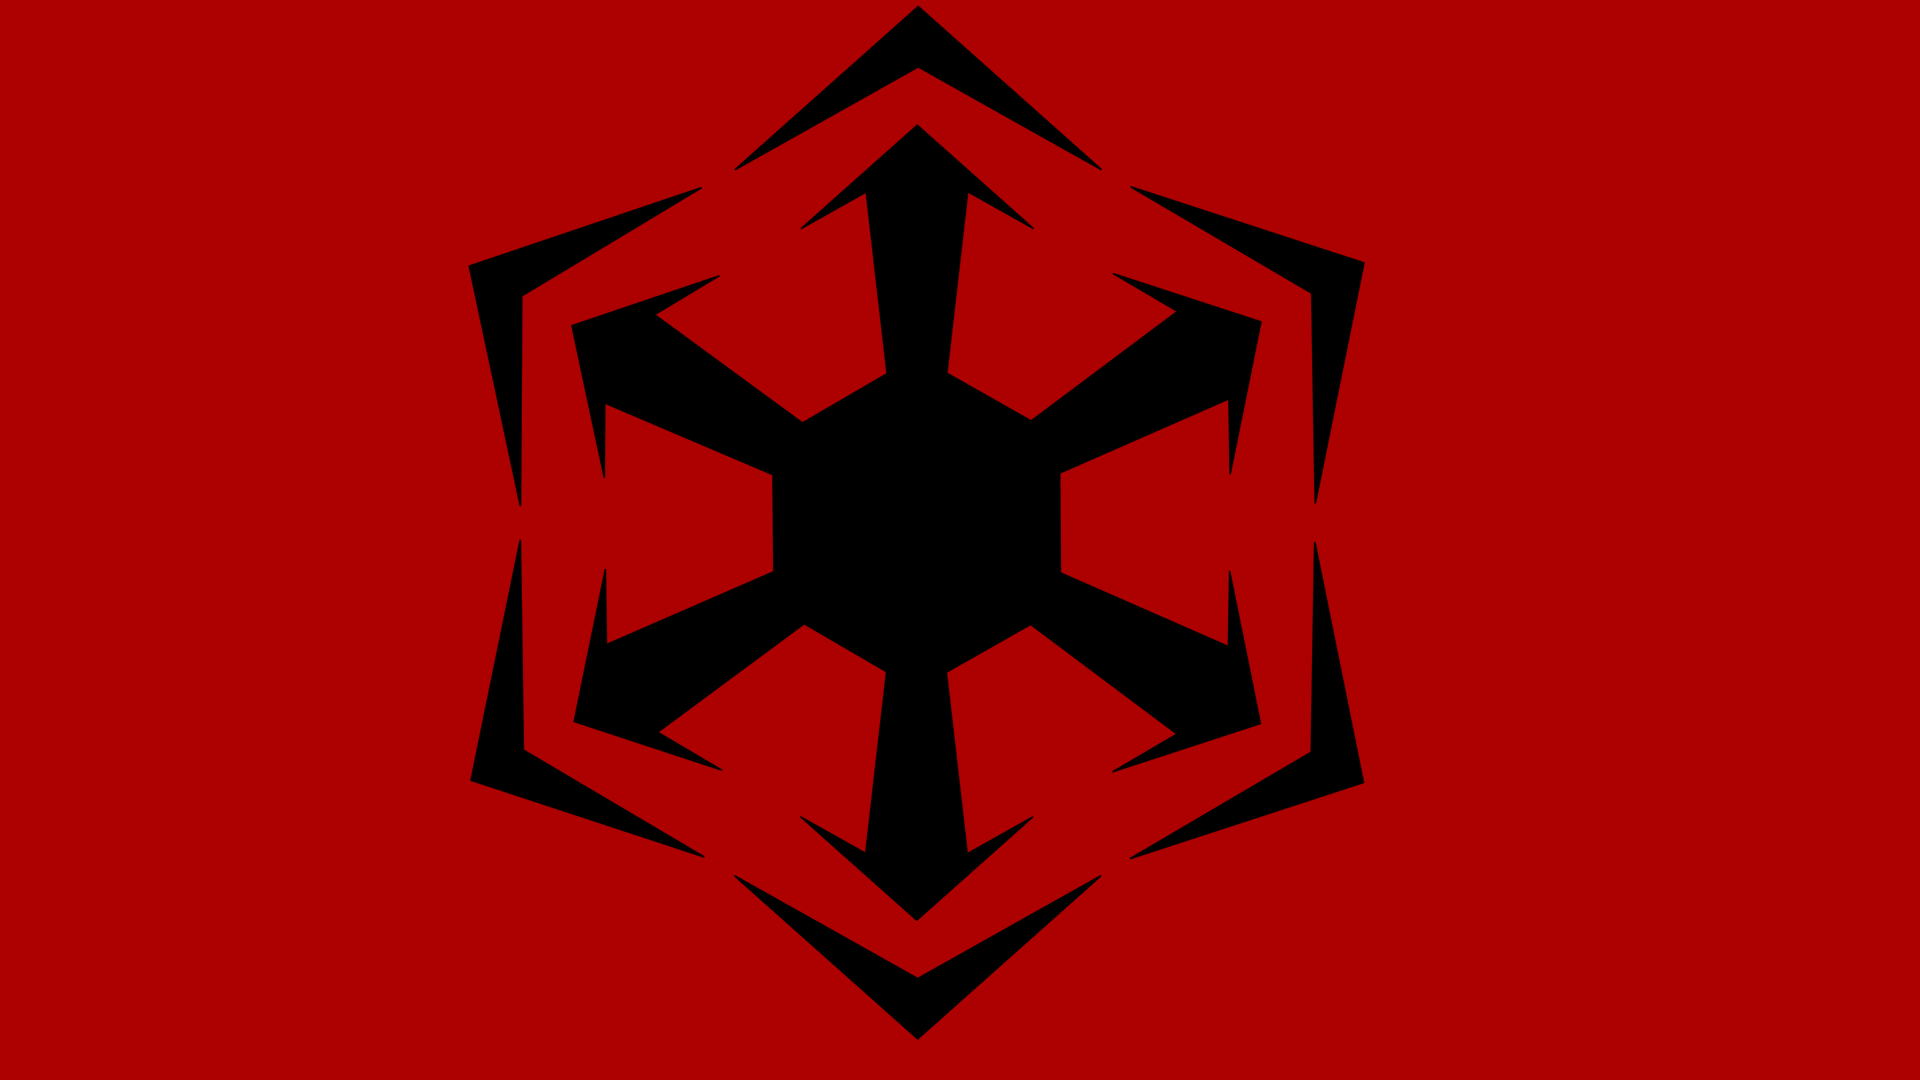 General 1920x1080 Sith Star Wars Star Wars: Knights of the Old Republic II: The Sith Lords Knights of the Old Republic video games PC gaming red background simple background logo red